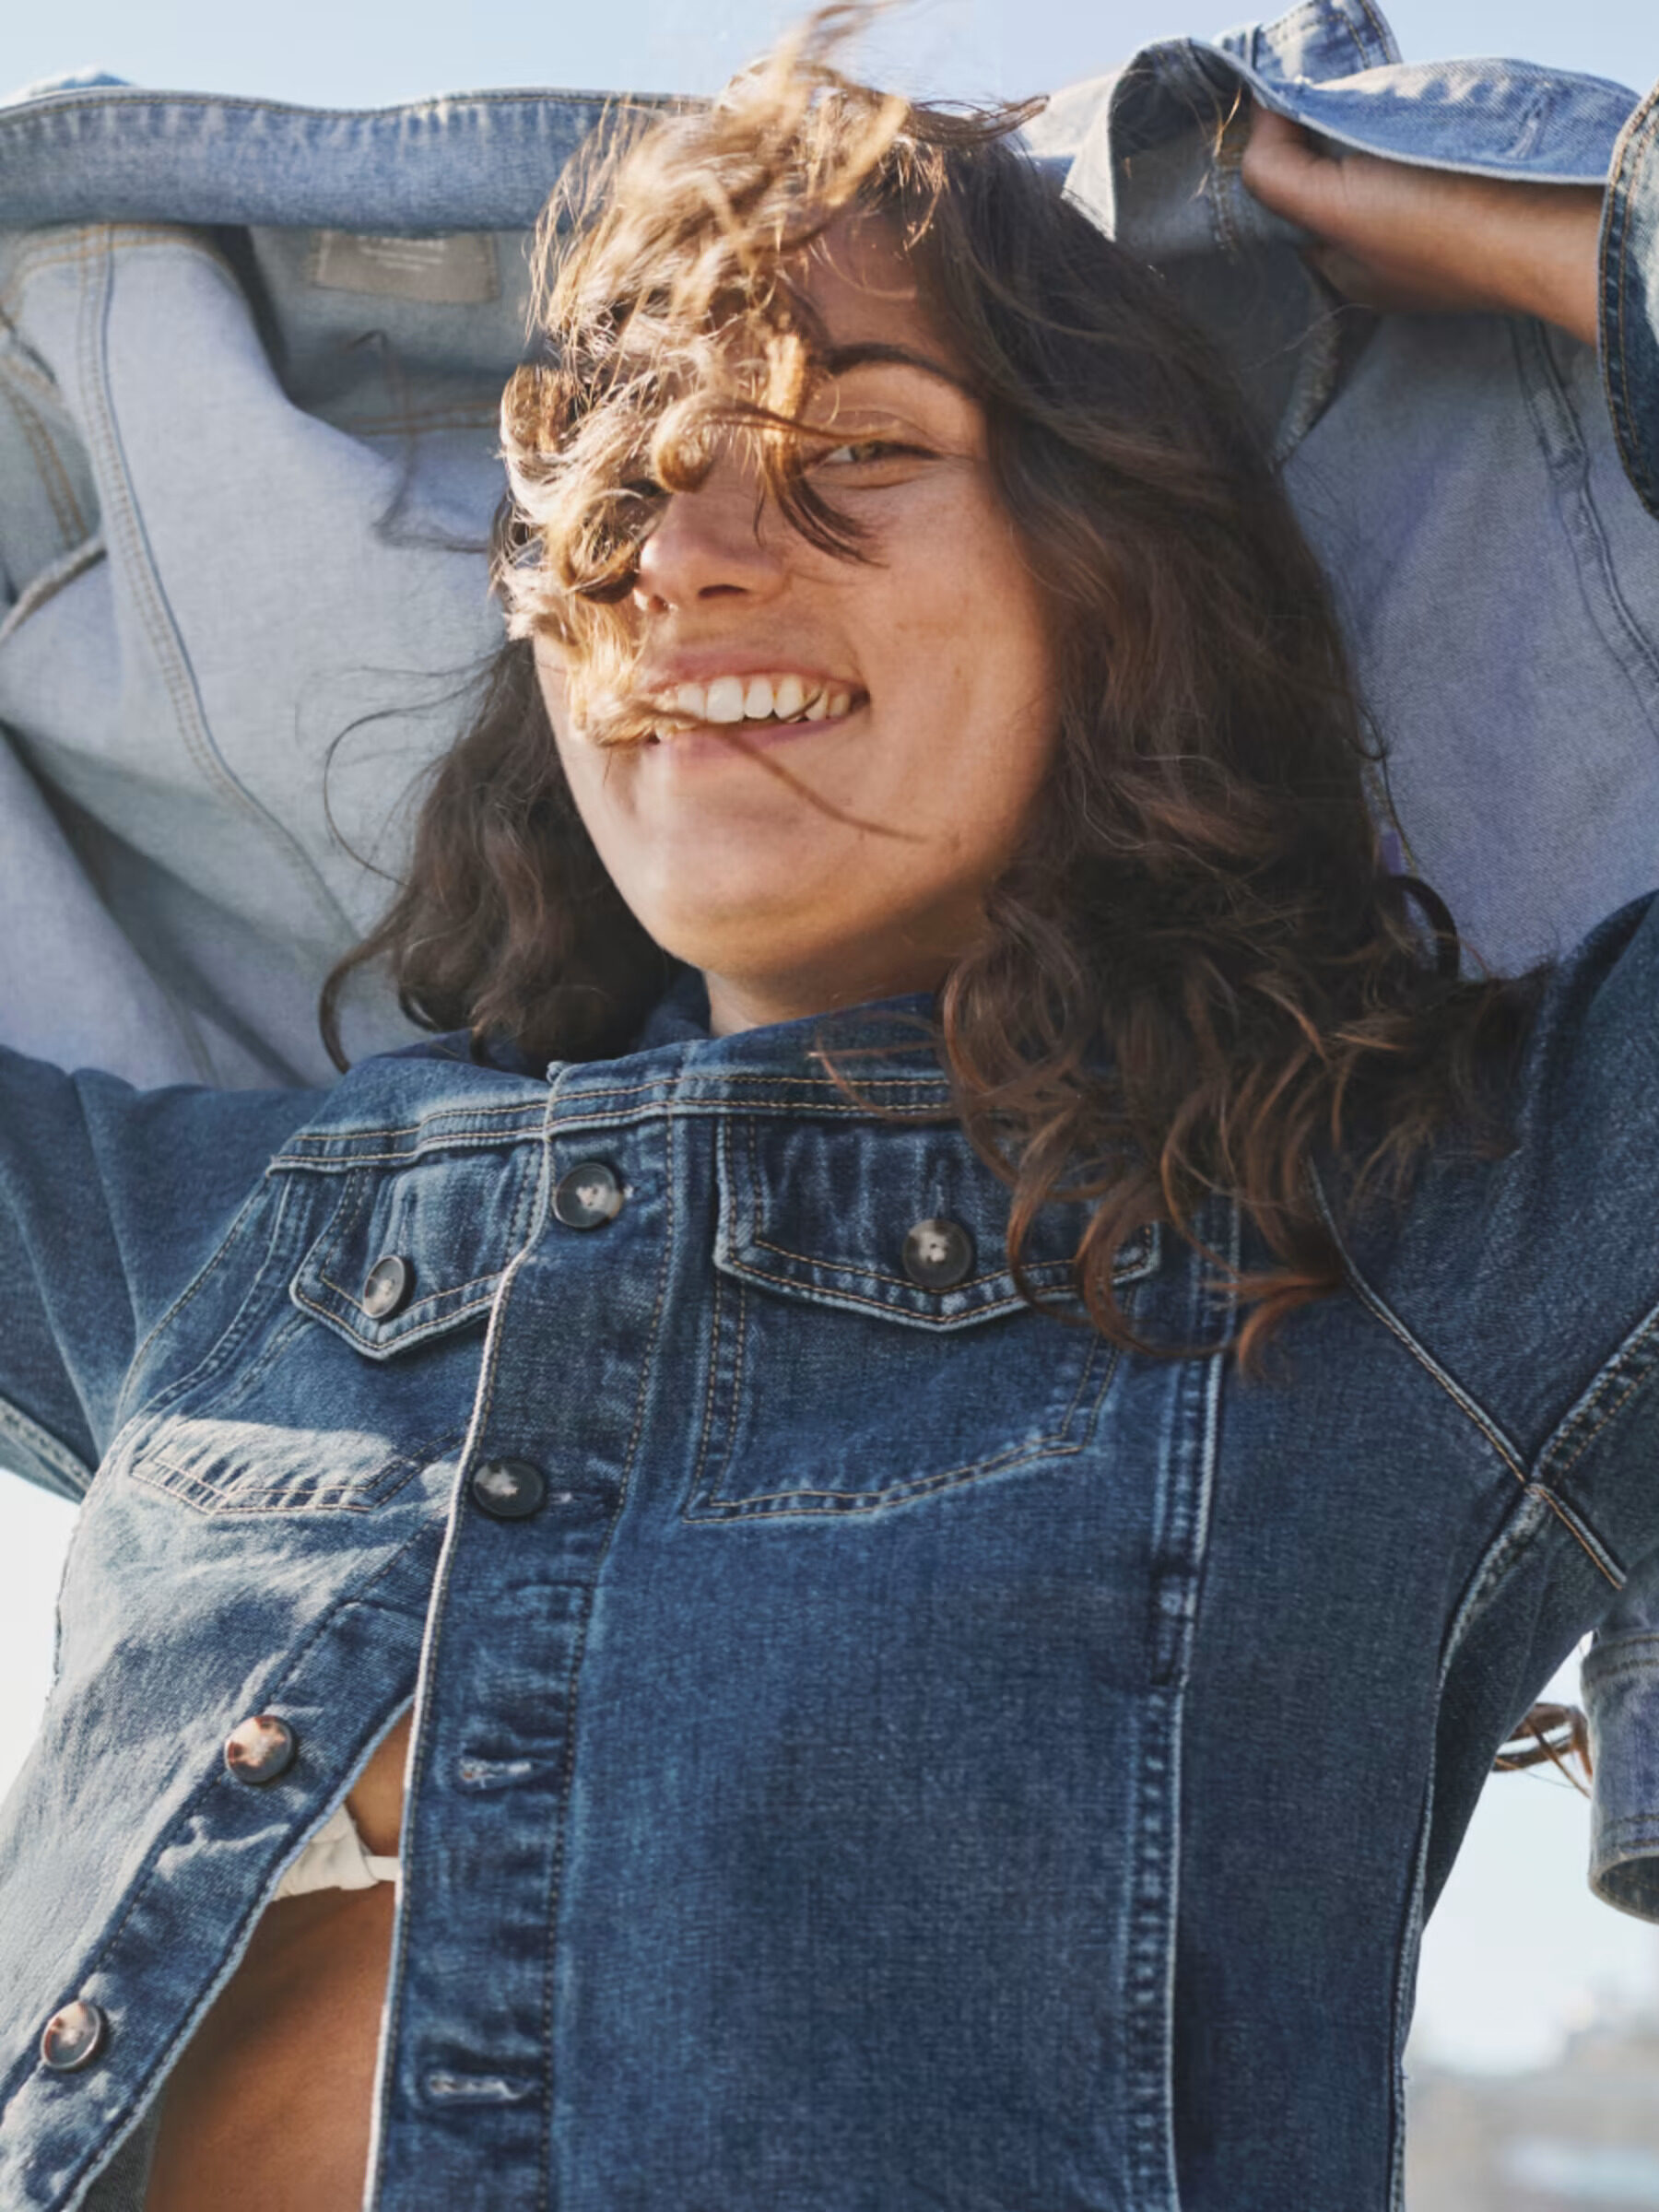 Model wearing an Everlane Dark Wash Jean Jacket while smiling and the wind blowing through their hair